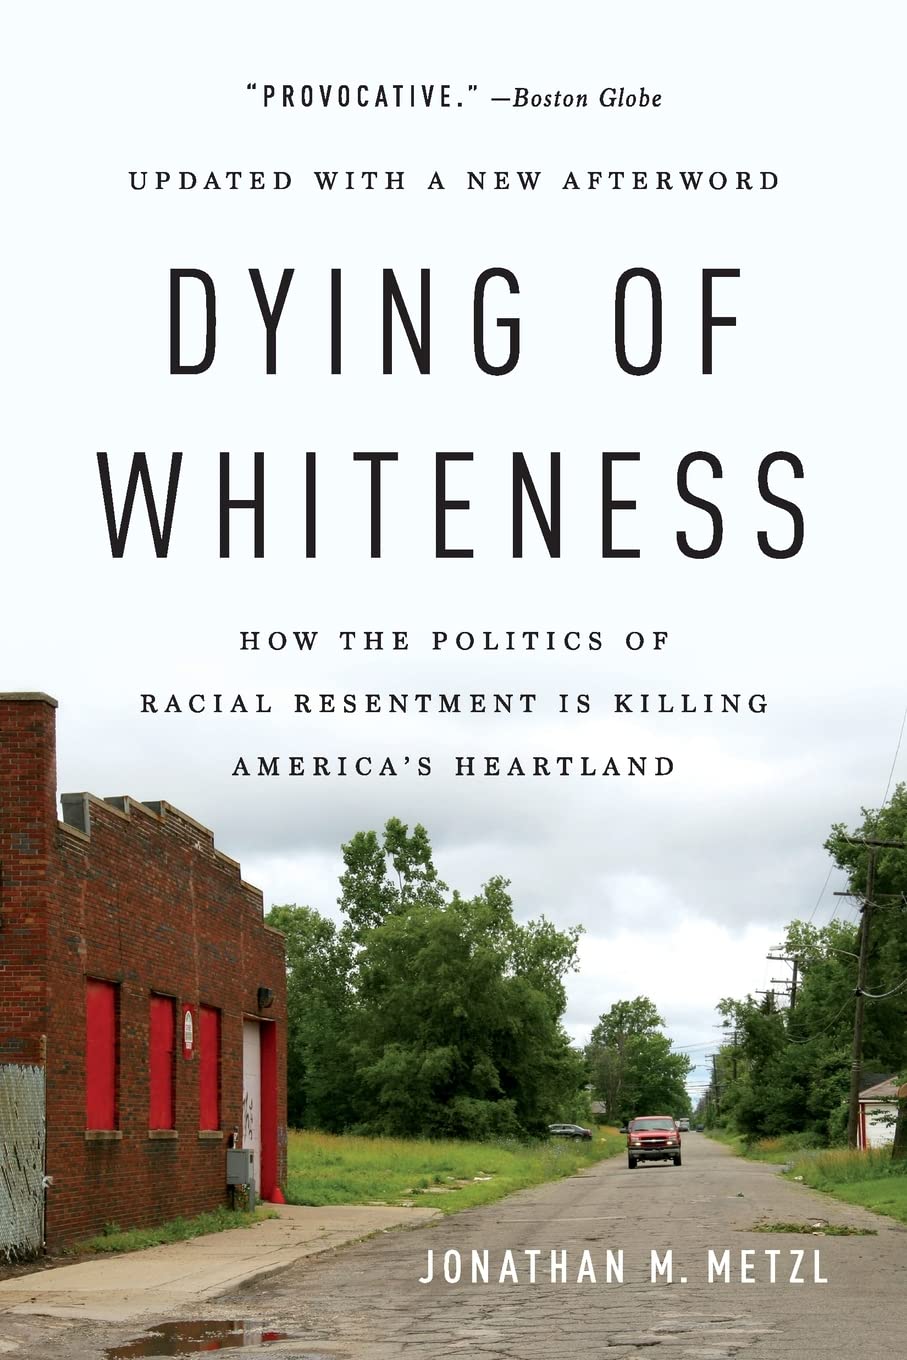 Dying of Whiteness: How the Politics of Racial Resentment Is Killing America's Heartland (Paperback)